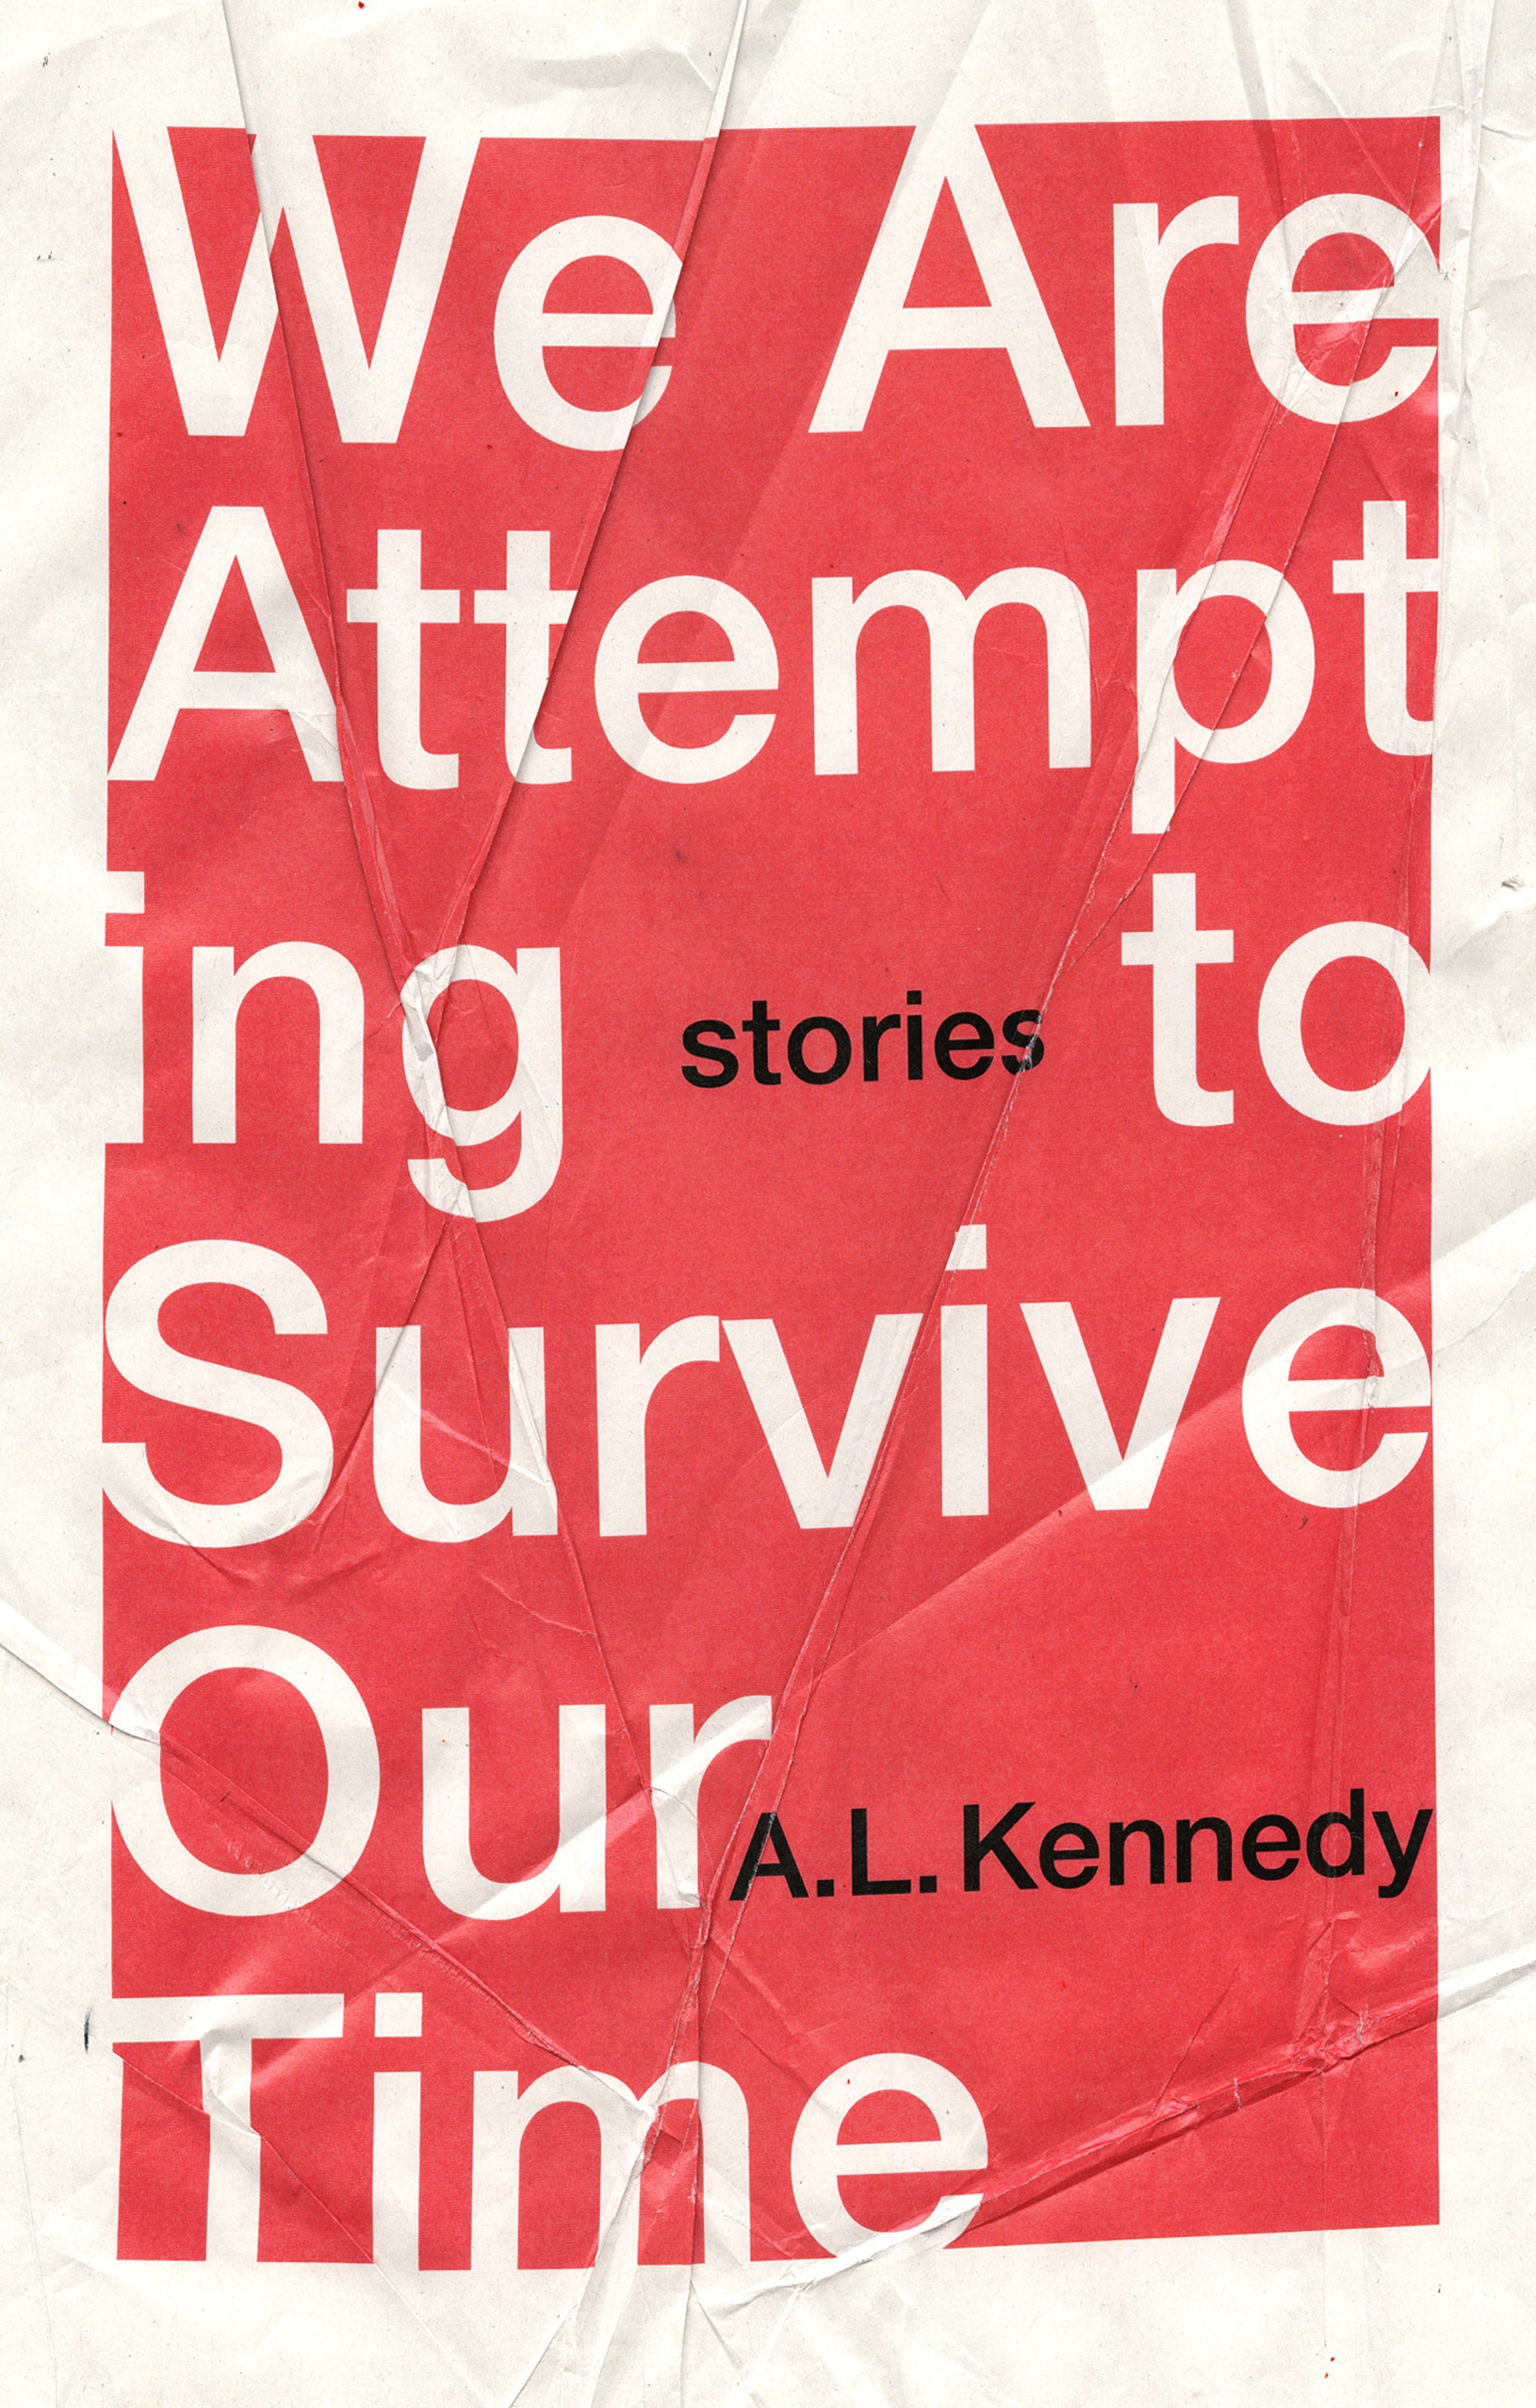 Book “We Are Attempting to Survive Our Time” by A.L. Kennedy — April 2, 2020